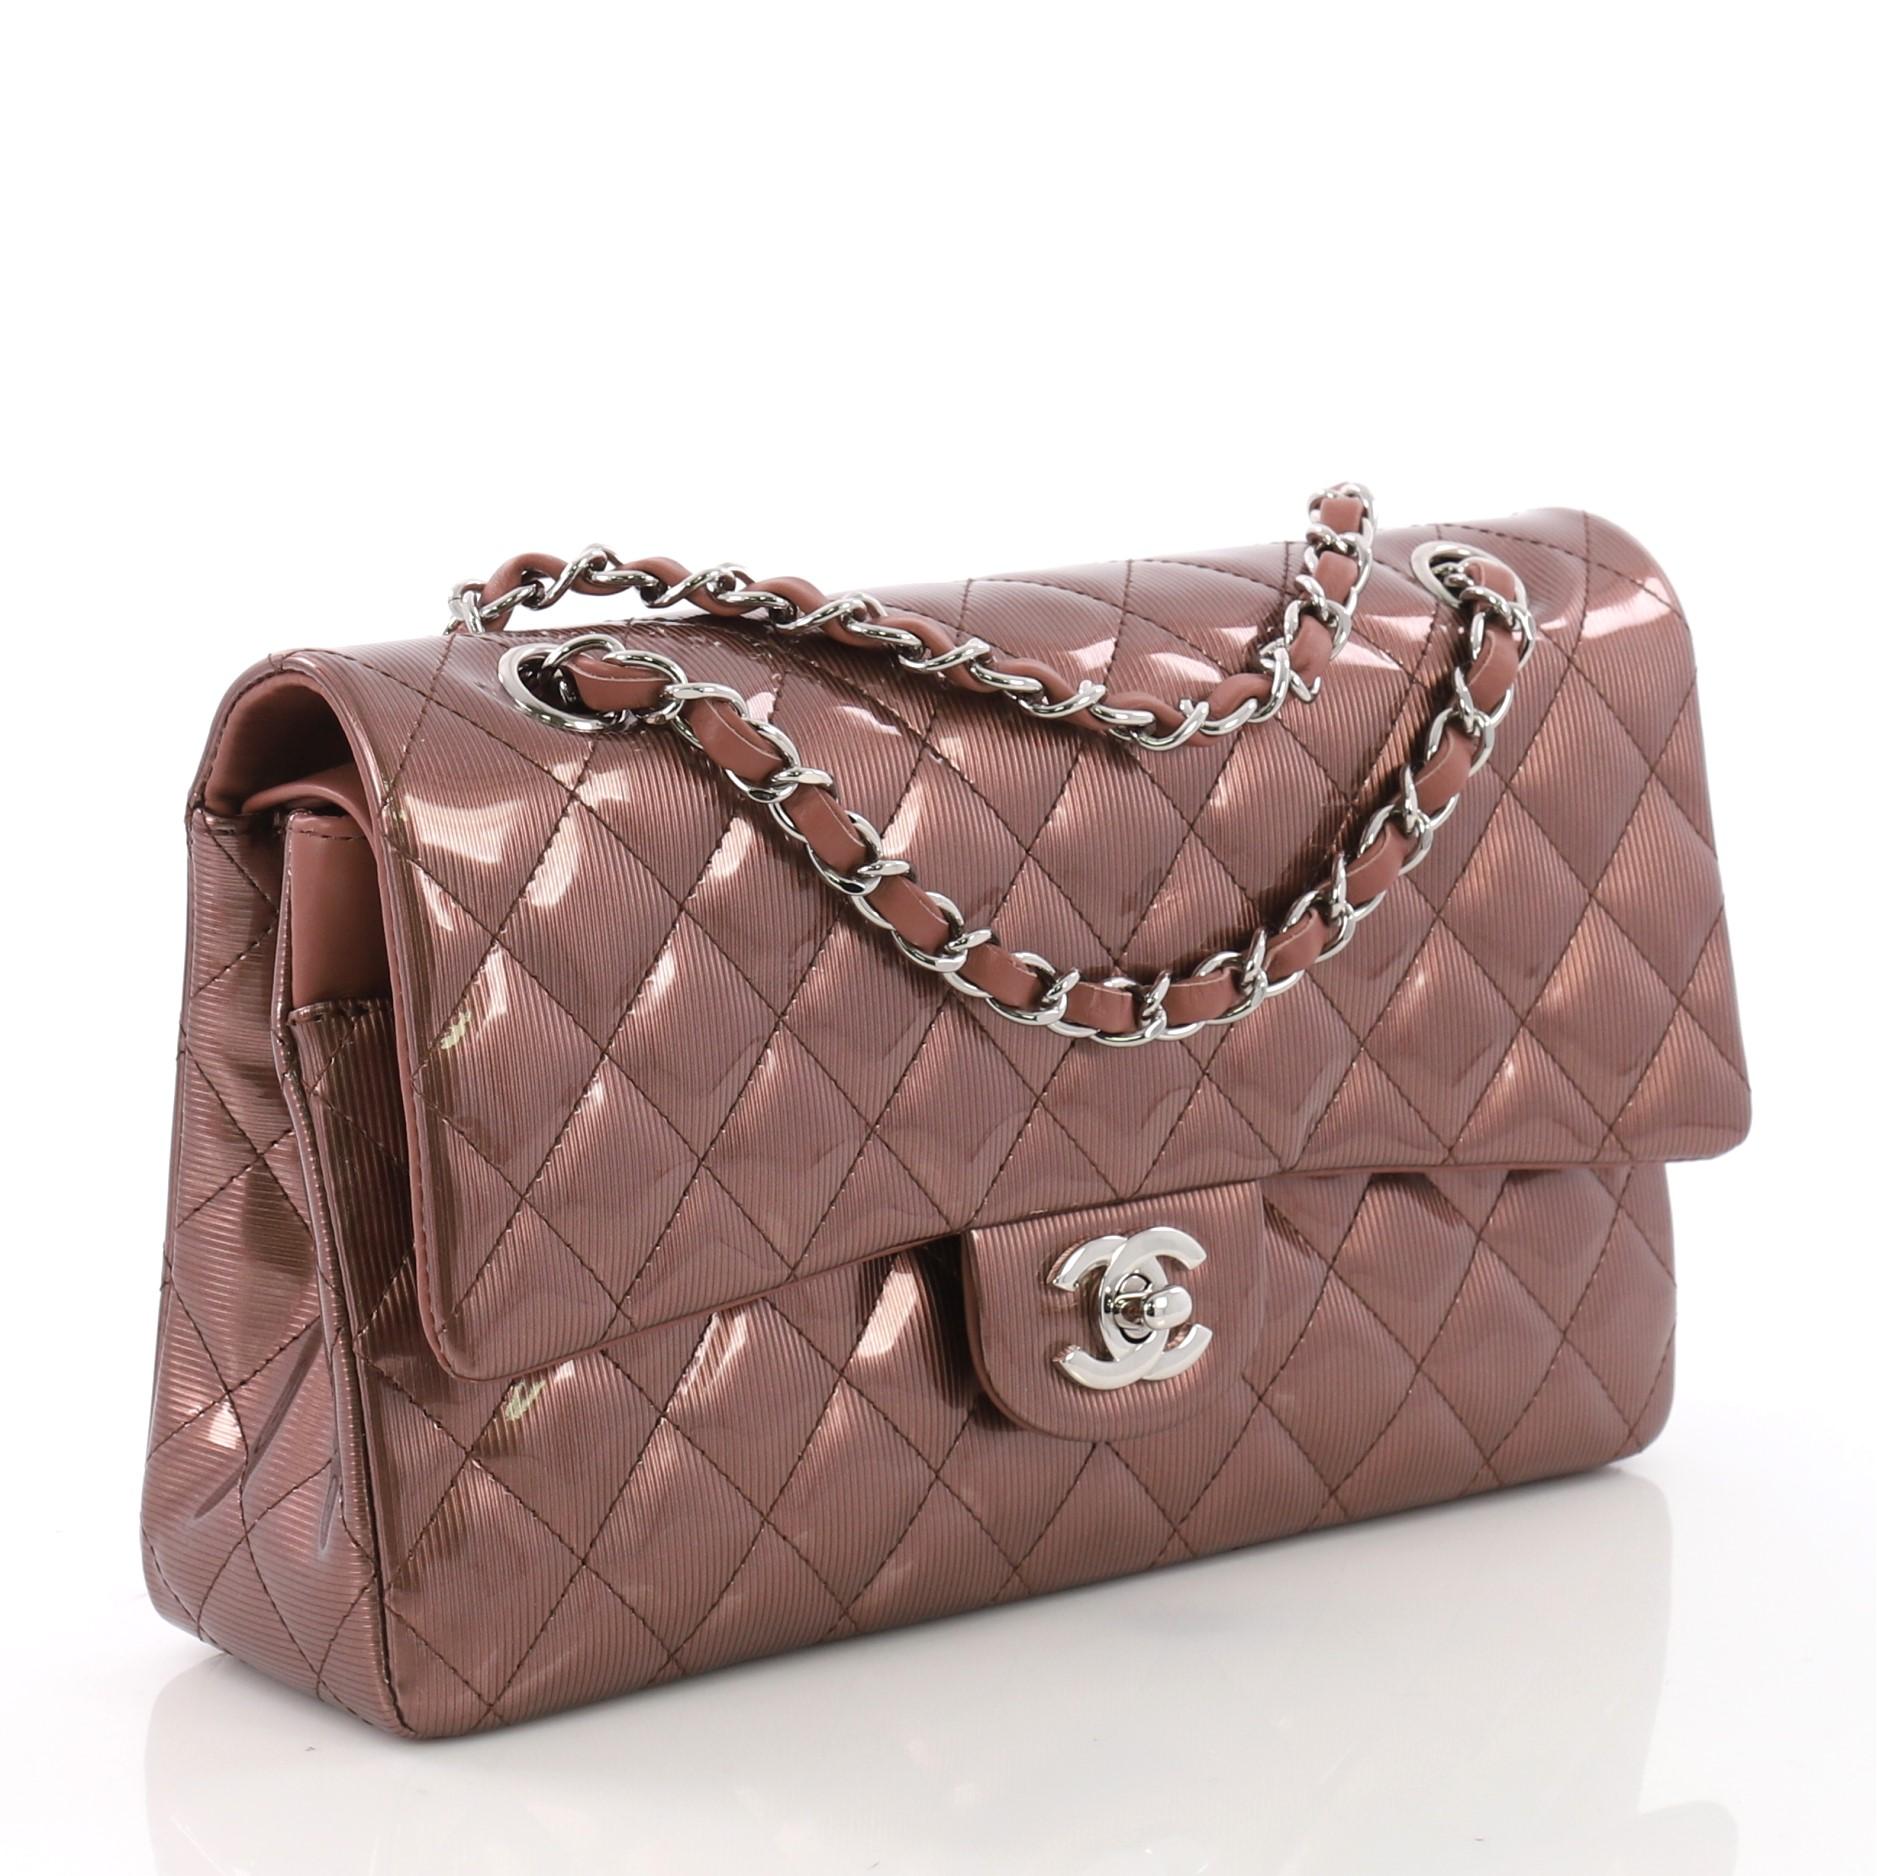 Brown Chanel Classic Double Flap Bag Quilted Striated Metallic Patent Medium